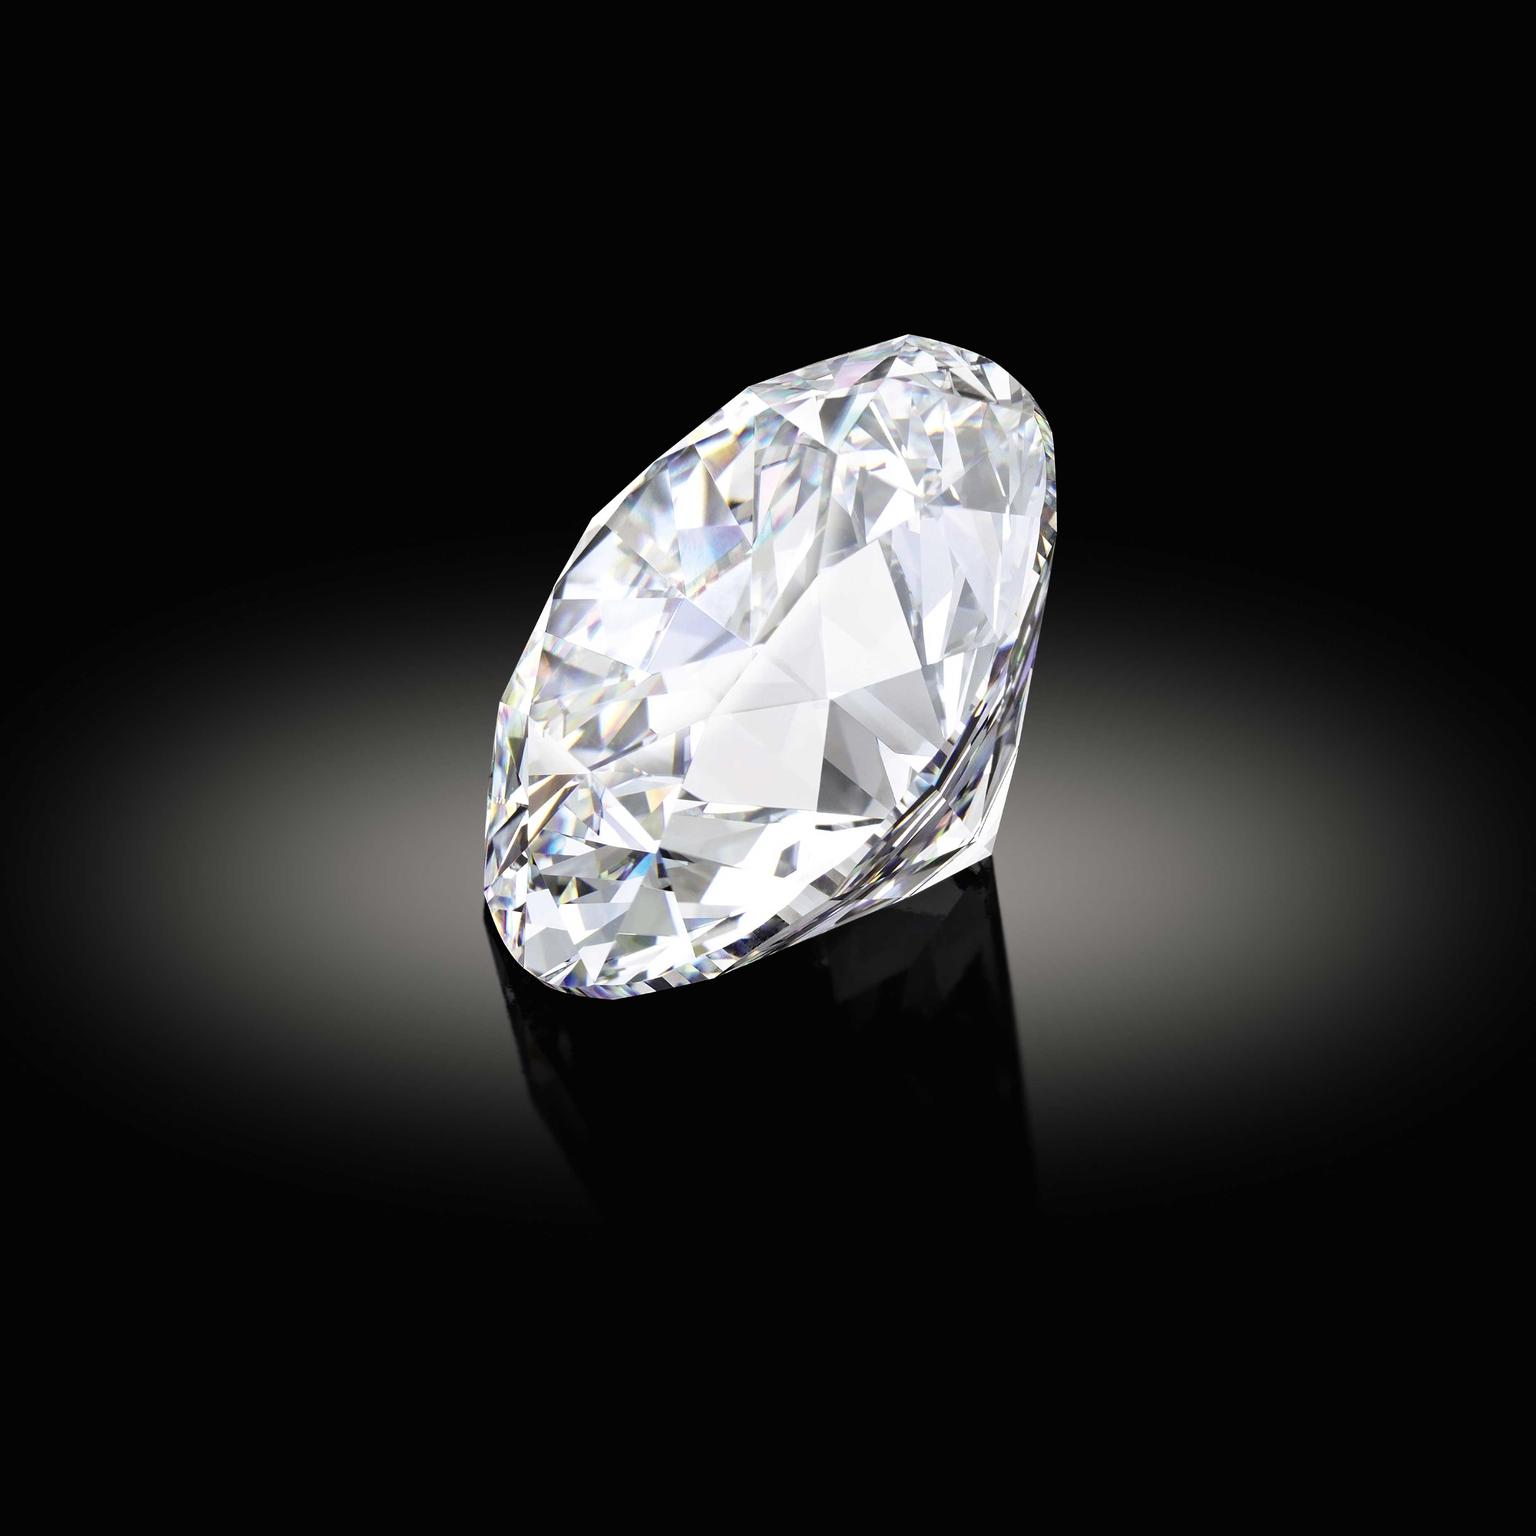 This-102.34-carat-diamond-is-the-largest-D-Flawless-brilliant-cut-diamond-graded-by-the-GIA